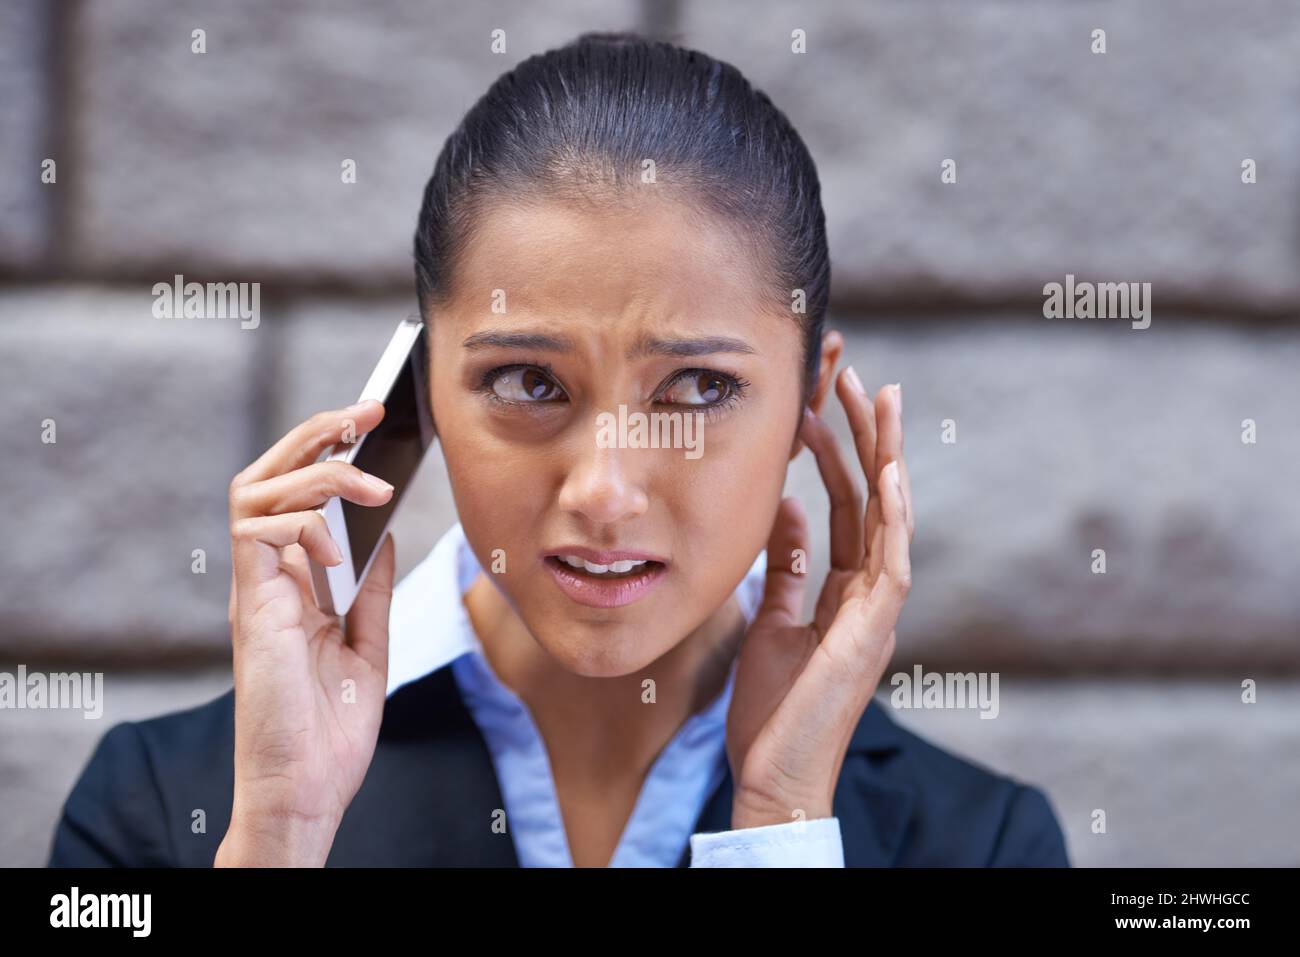 I cant quite hear you. A shot of a young businesswoman having trouble hearing on her cellphone. Stock Photo